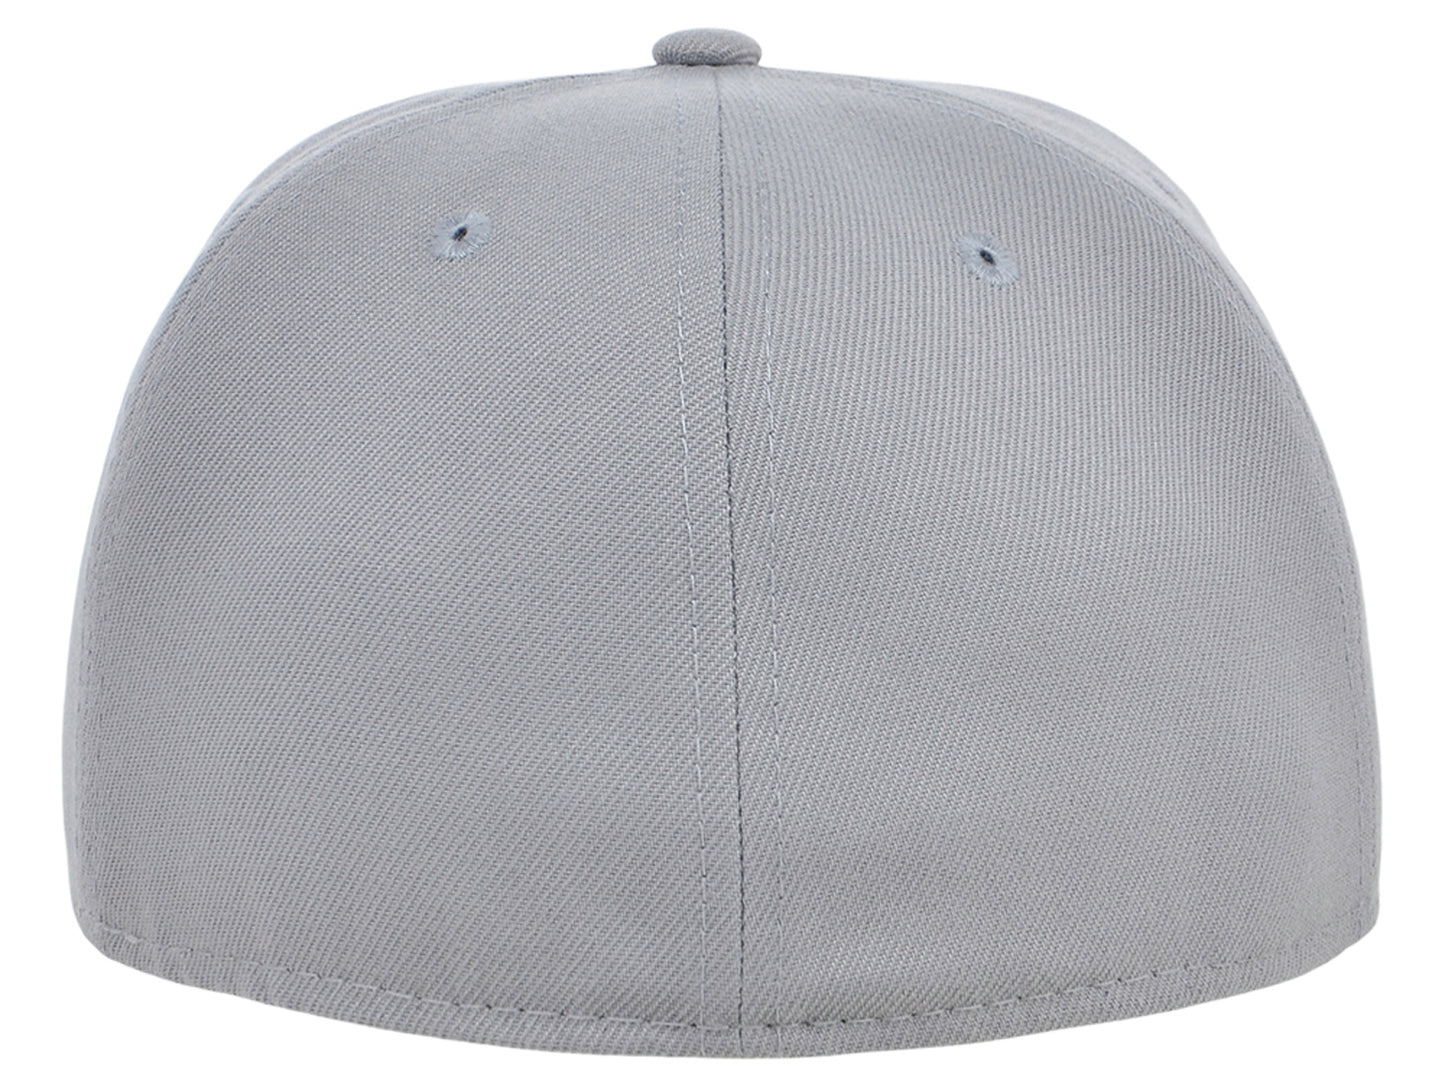 Crowns By Lids Full Court Fitted UV Cap - Light Grey/Sky Blue